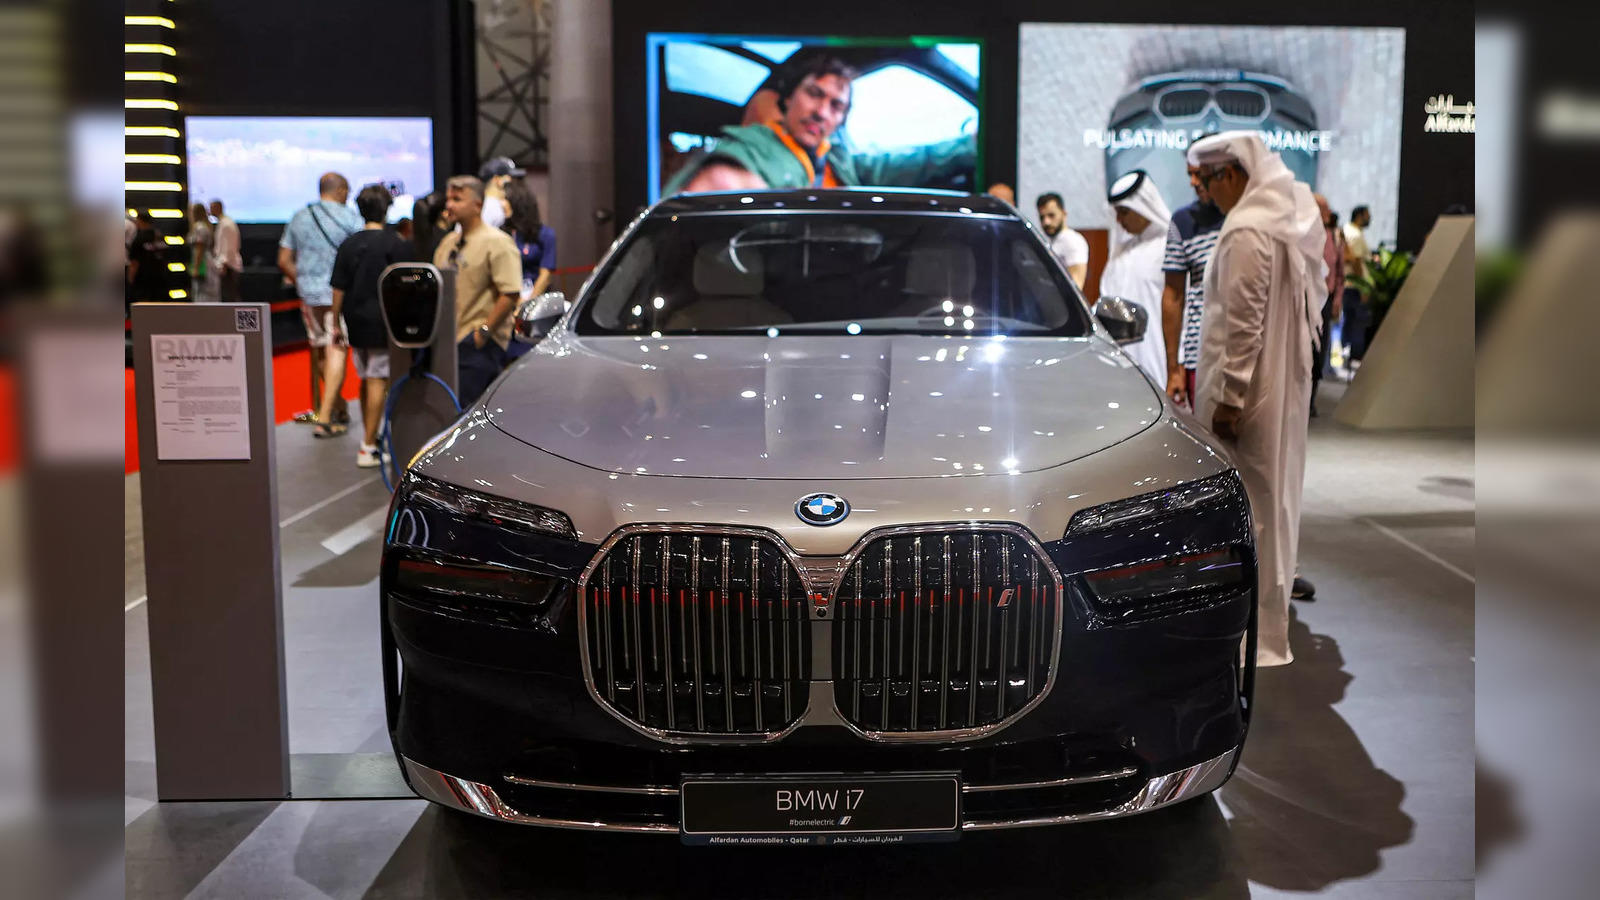 bmw: BMW posts record car sales at 9,580 units in India in Jan-Sep period -  The Economic Times